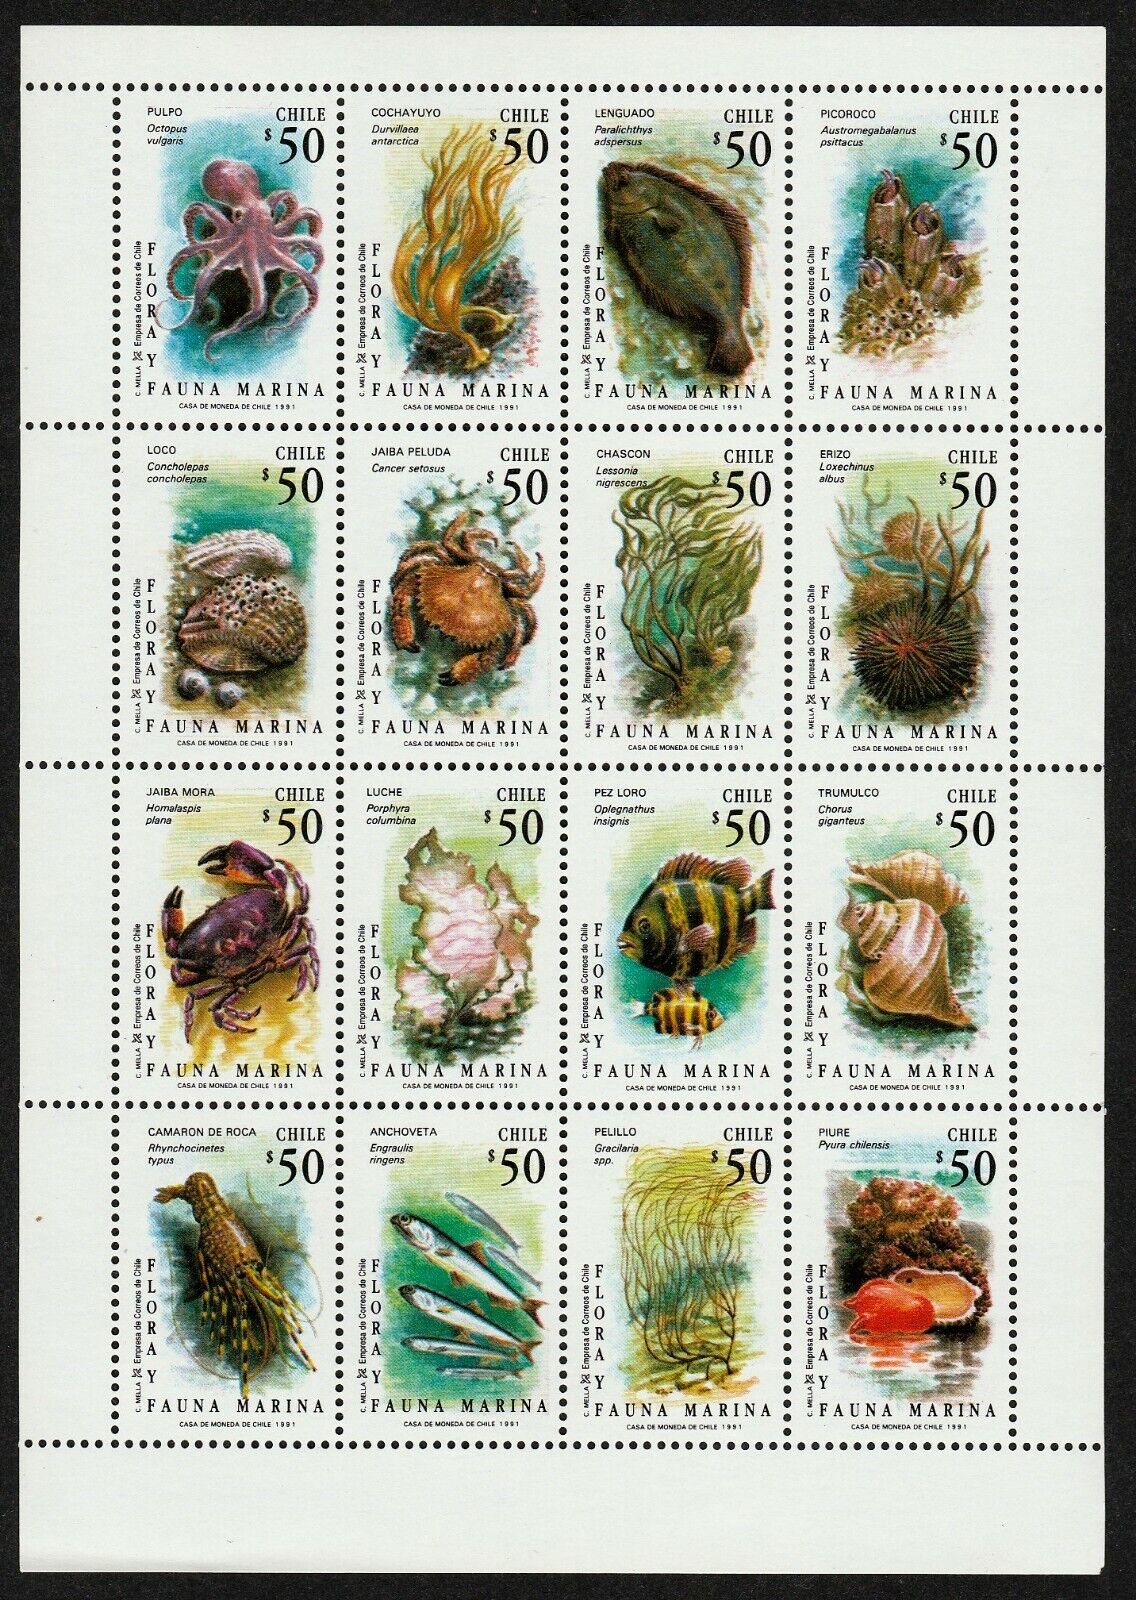 Chile 1991 Michel # 1444 - 1459 Sheetlet 16 Stamps Marine Life Mnh